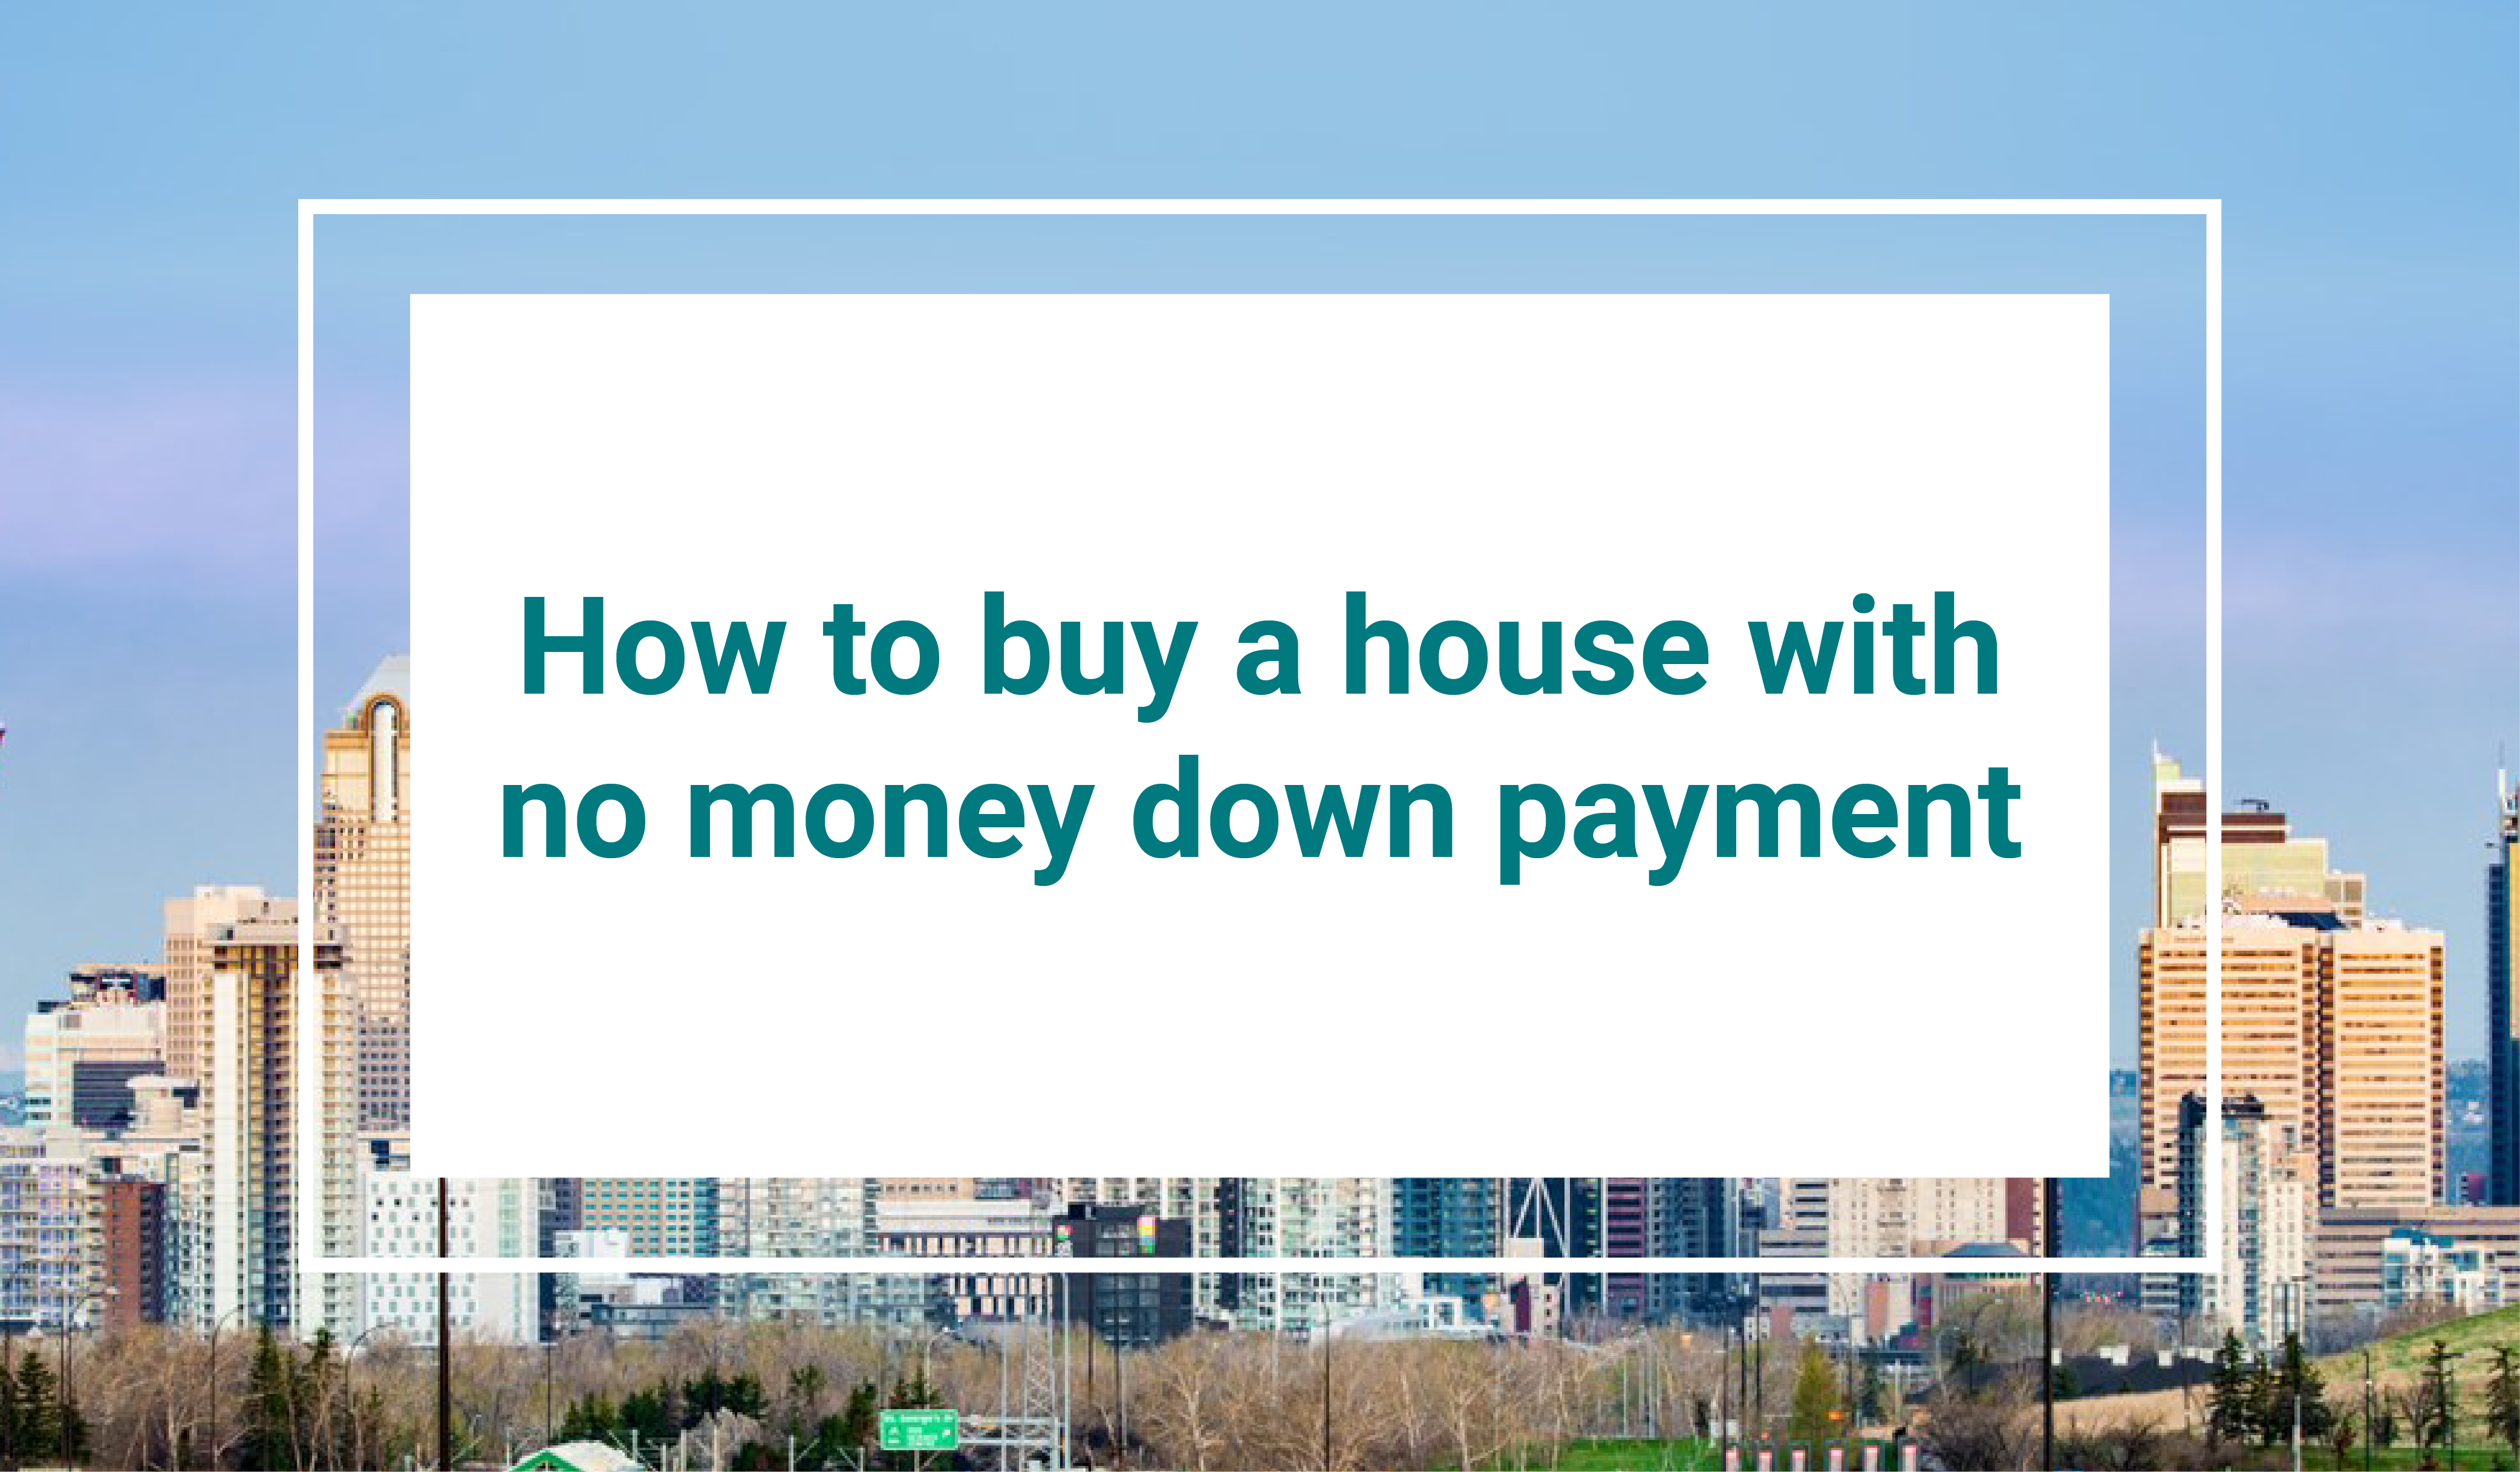 How to buy a house with no money down payment